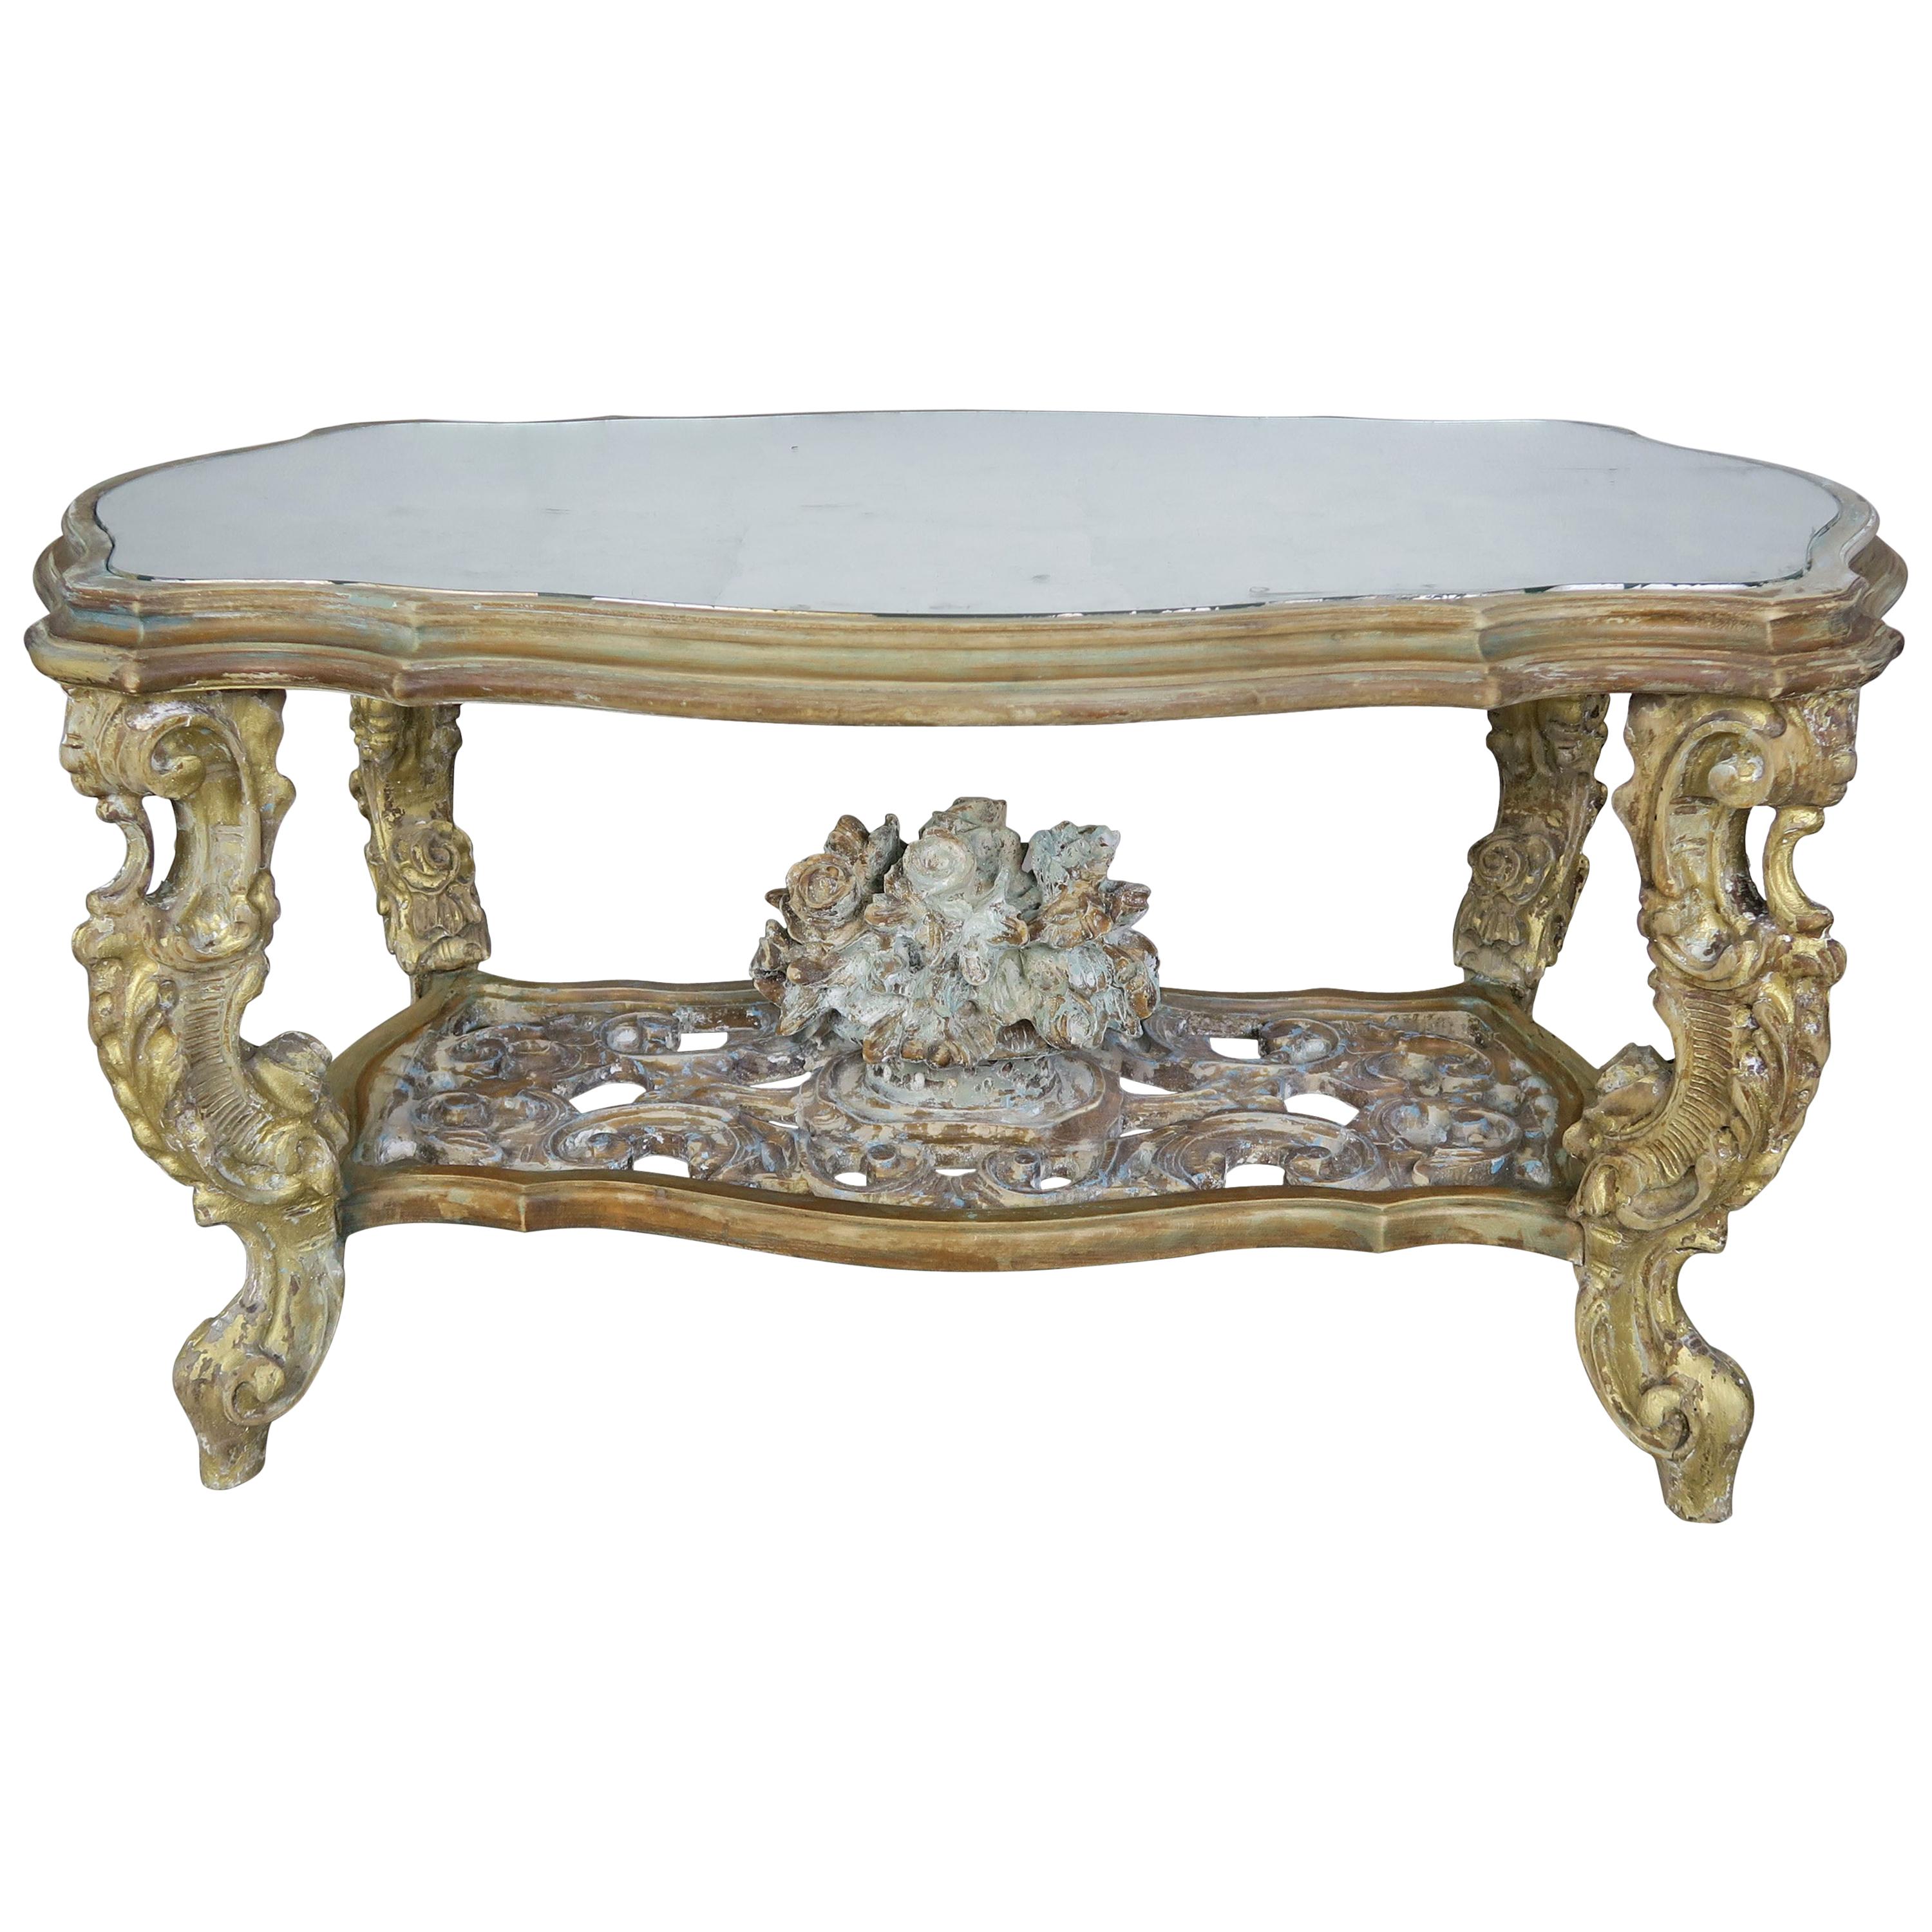 Carved French Rococo Style Tea Table with Silvered Mirror Top, circa 1930s